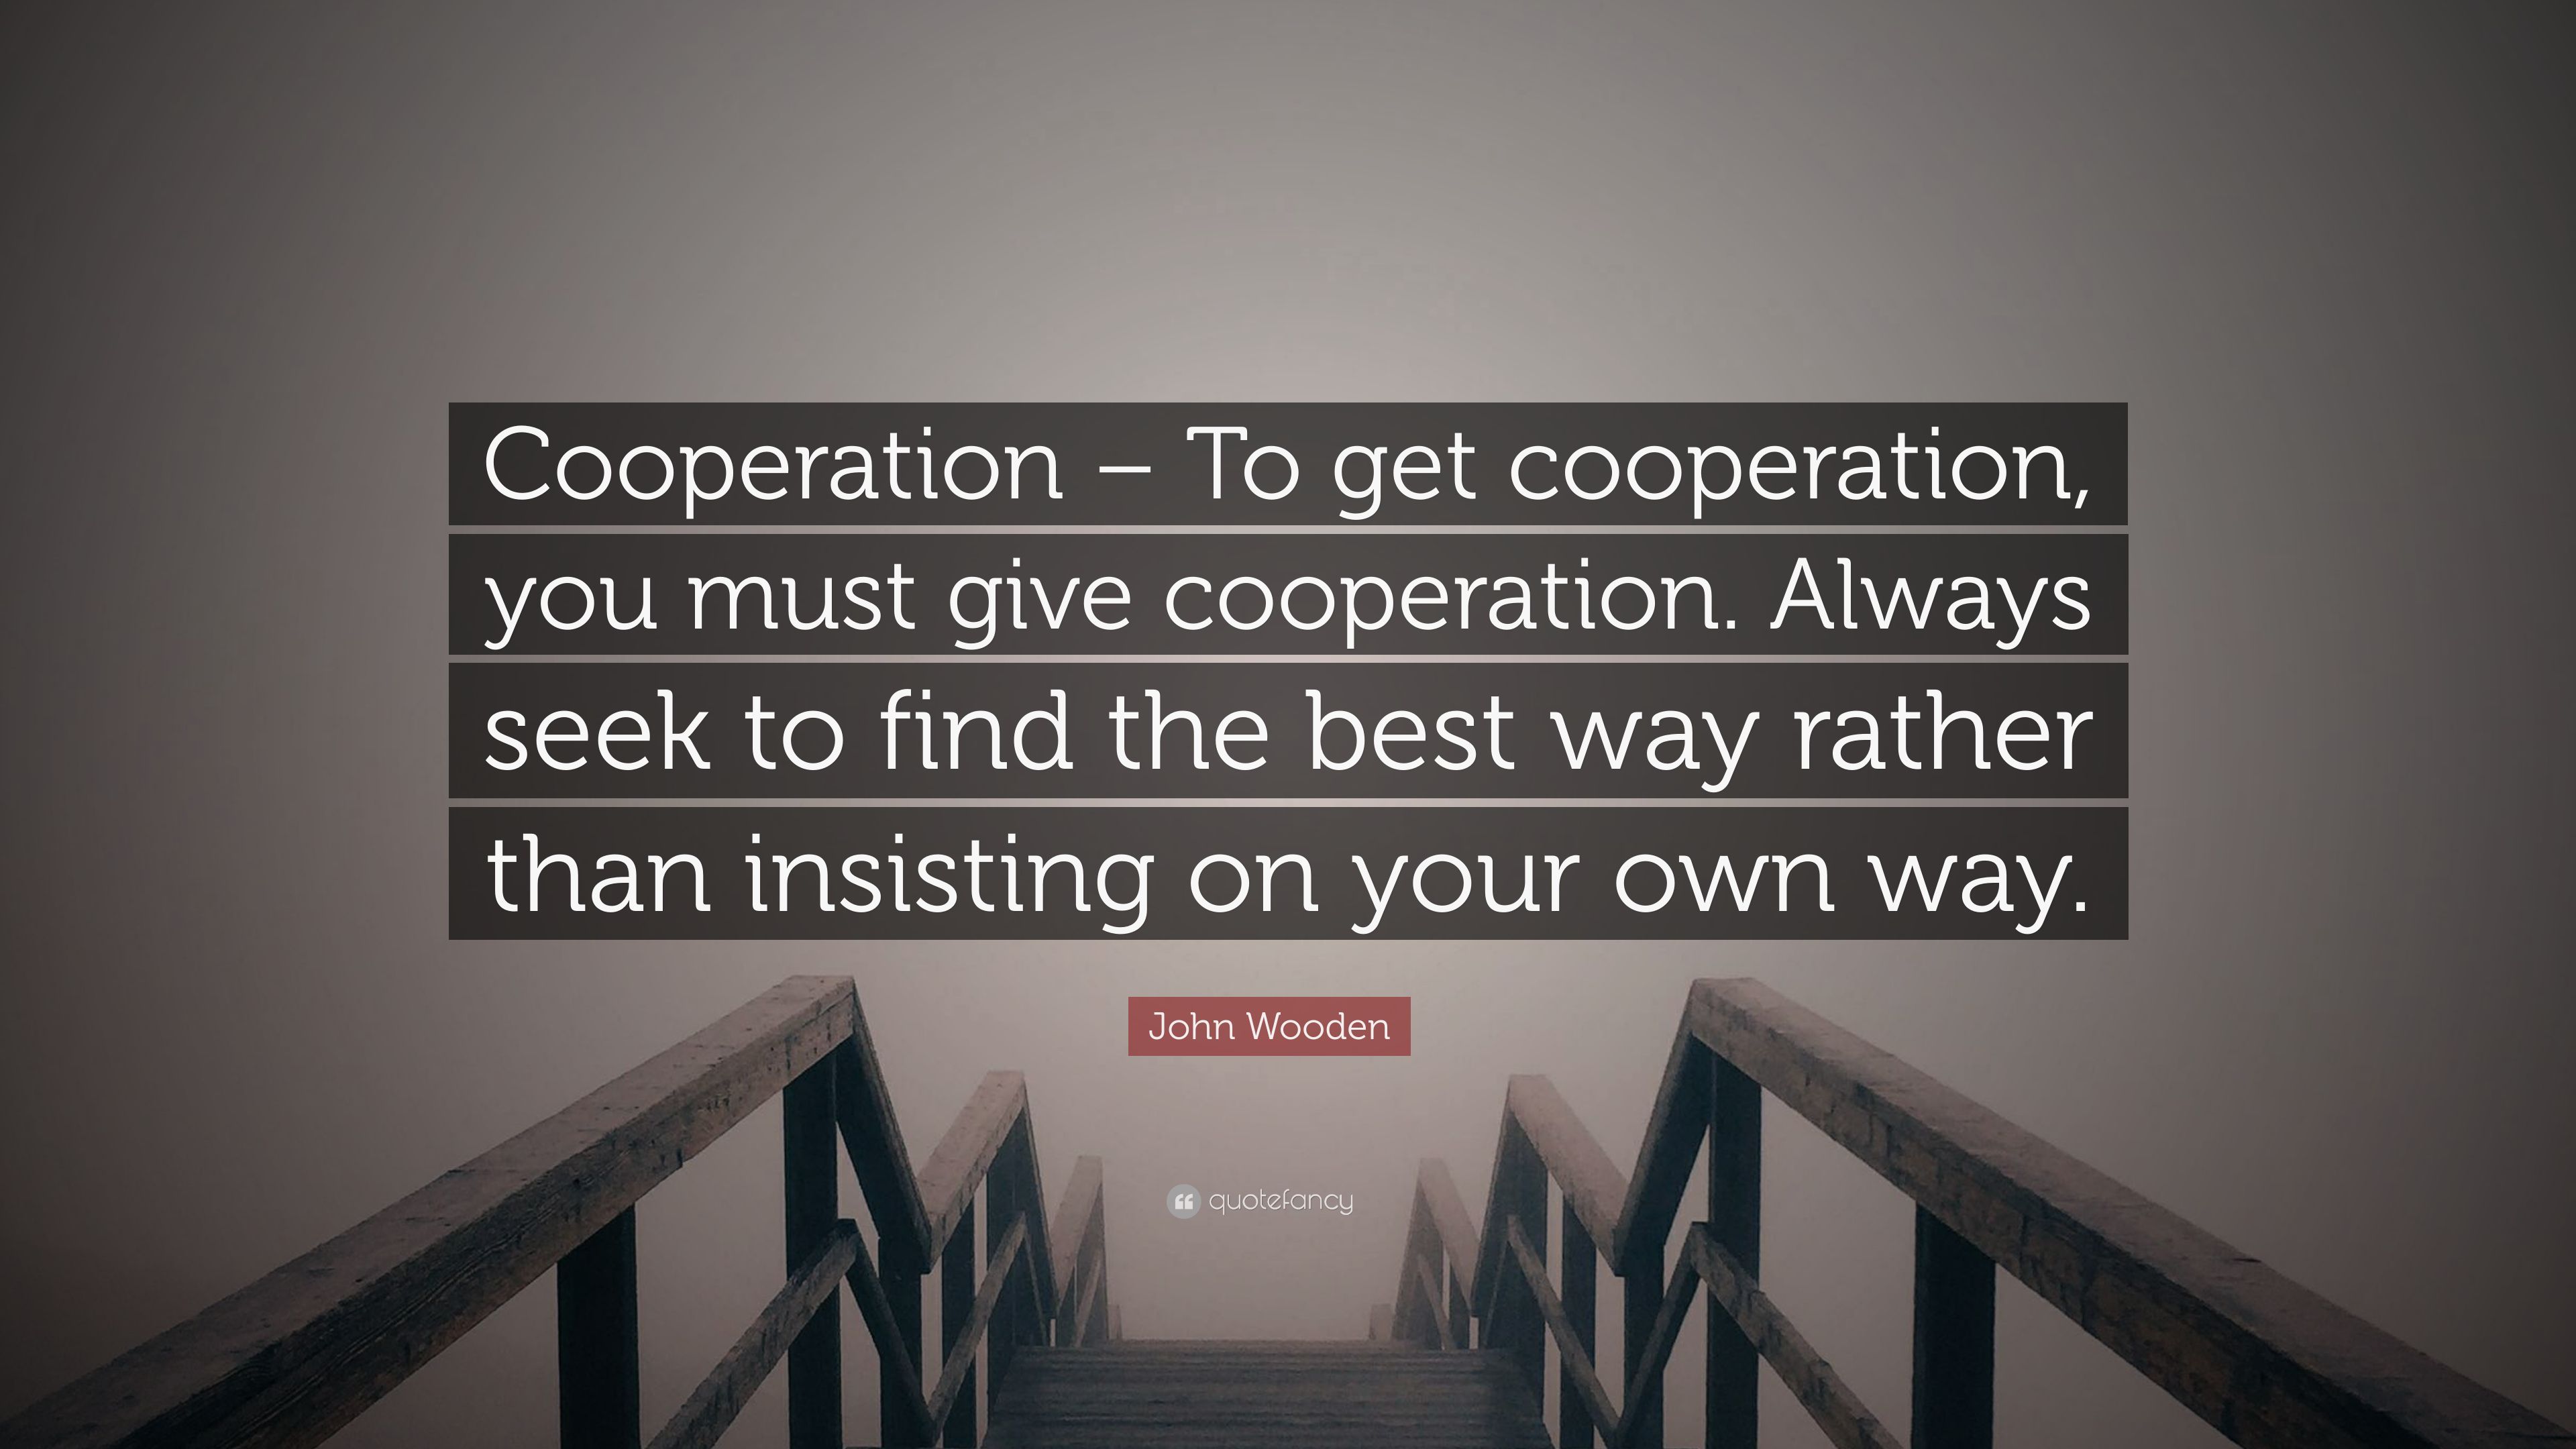 John Wooden Quote: “Cooperation